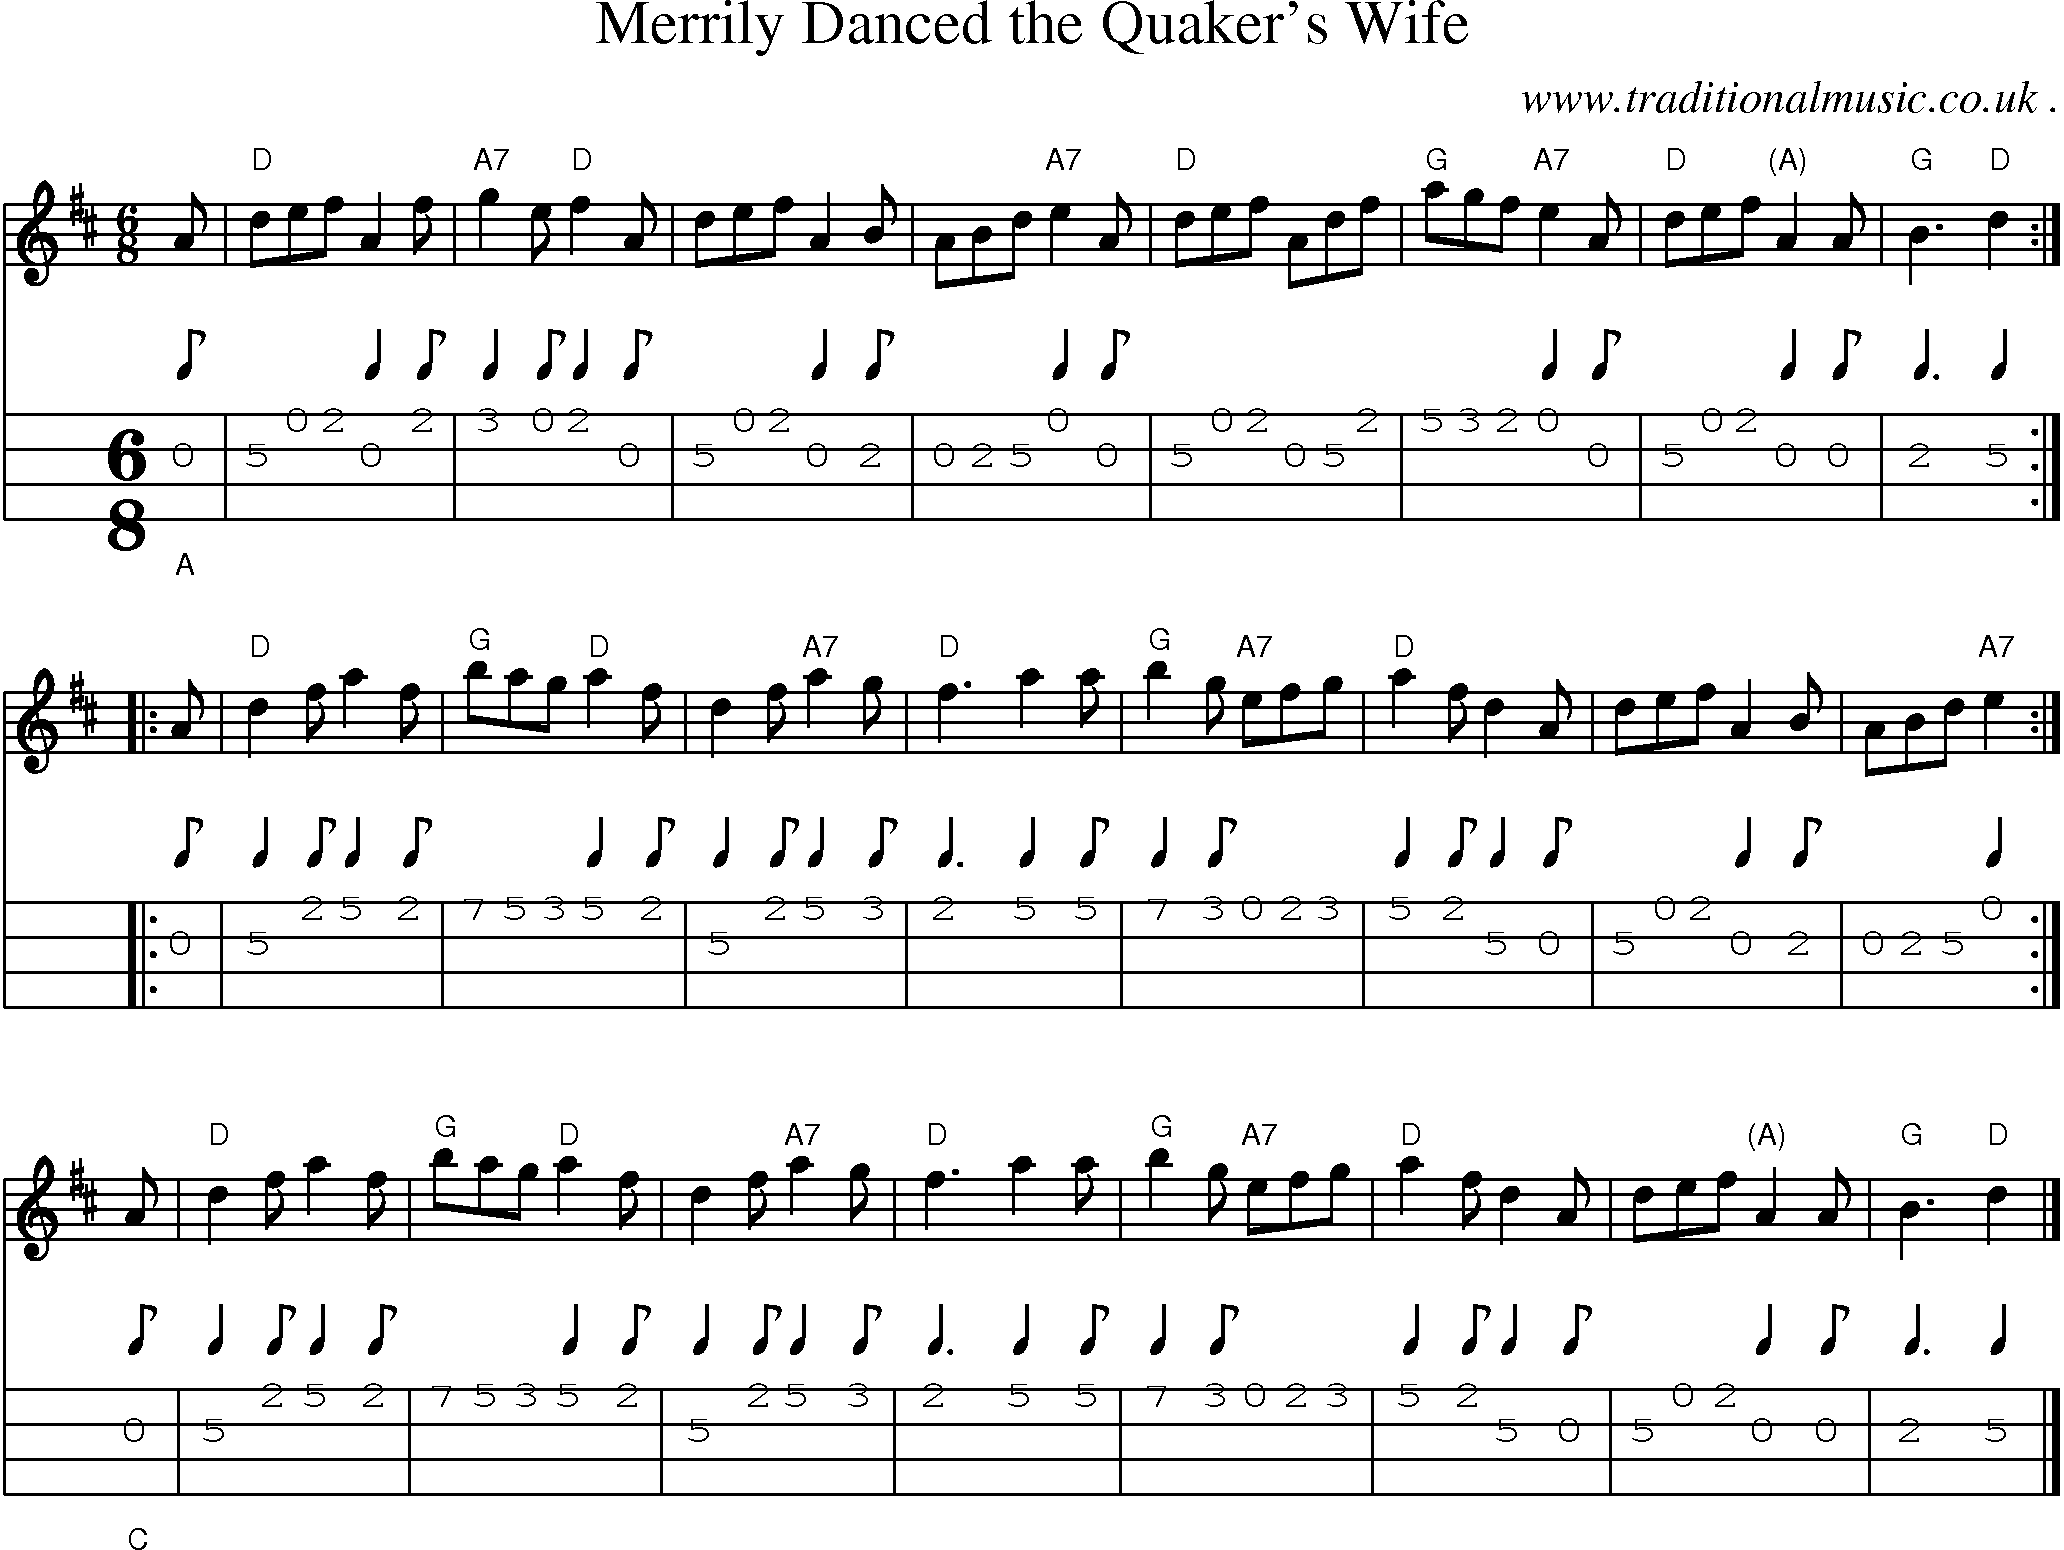 Sheet-music  score, Chords and Mandolin Tabs for Merrily Danced The Quakers Wife